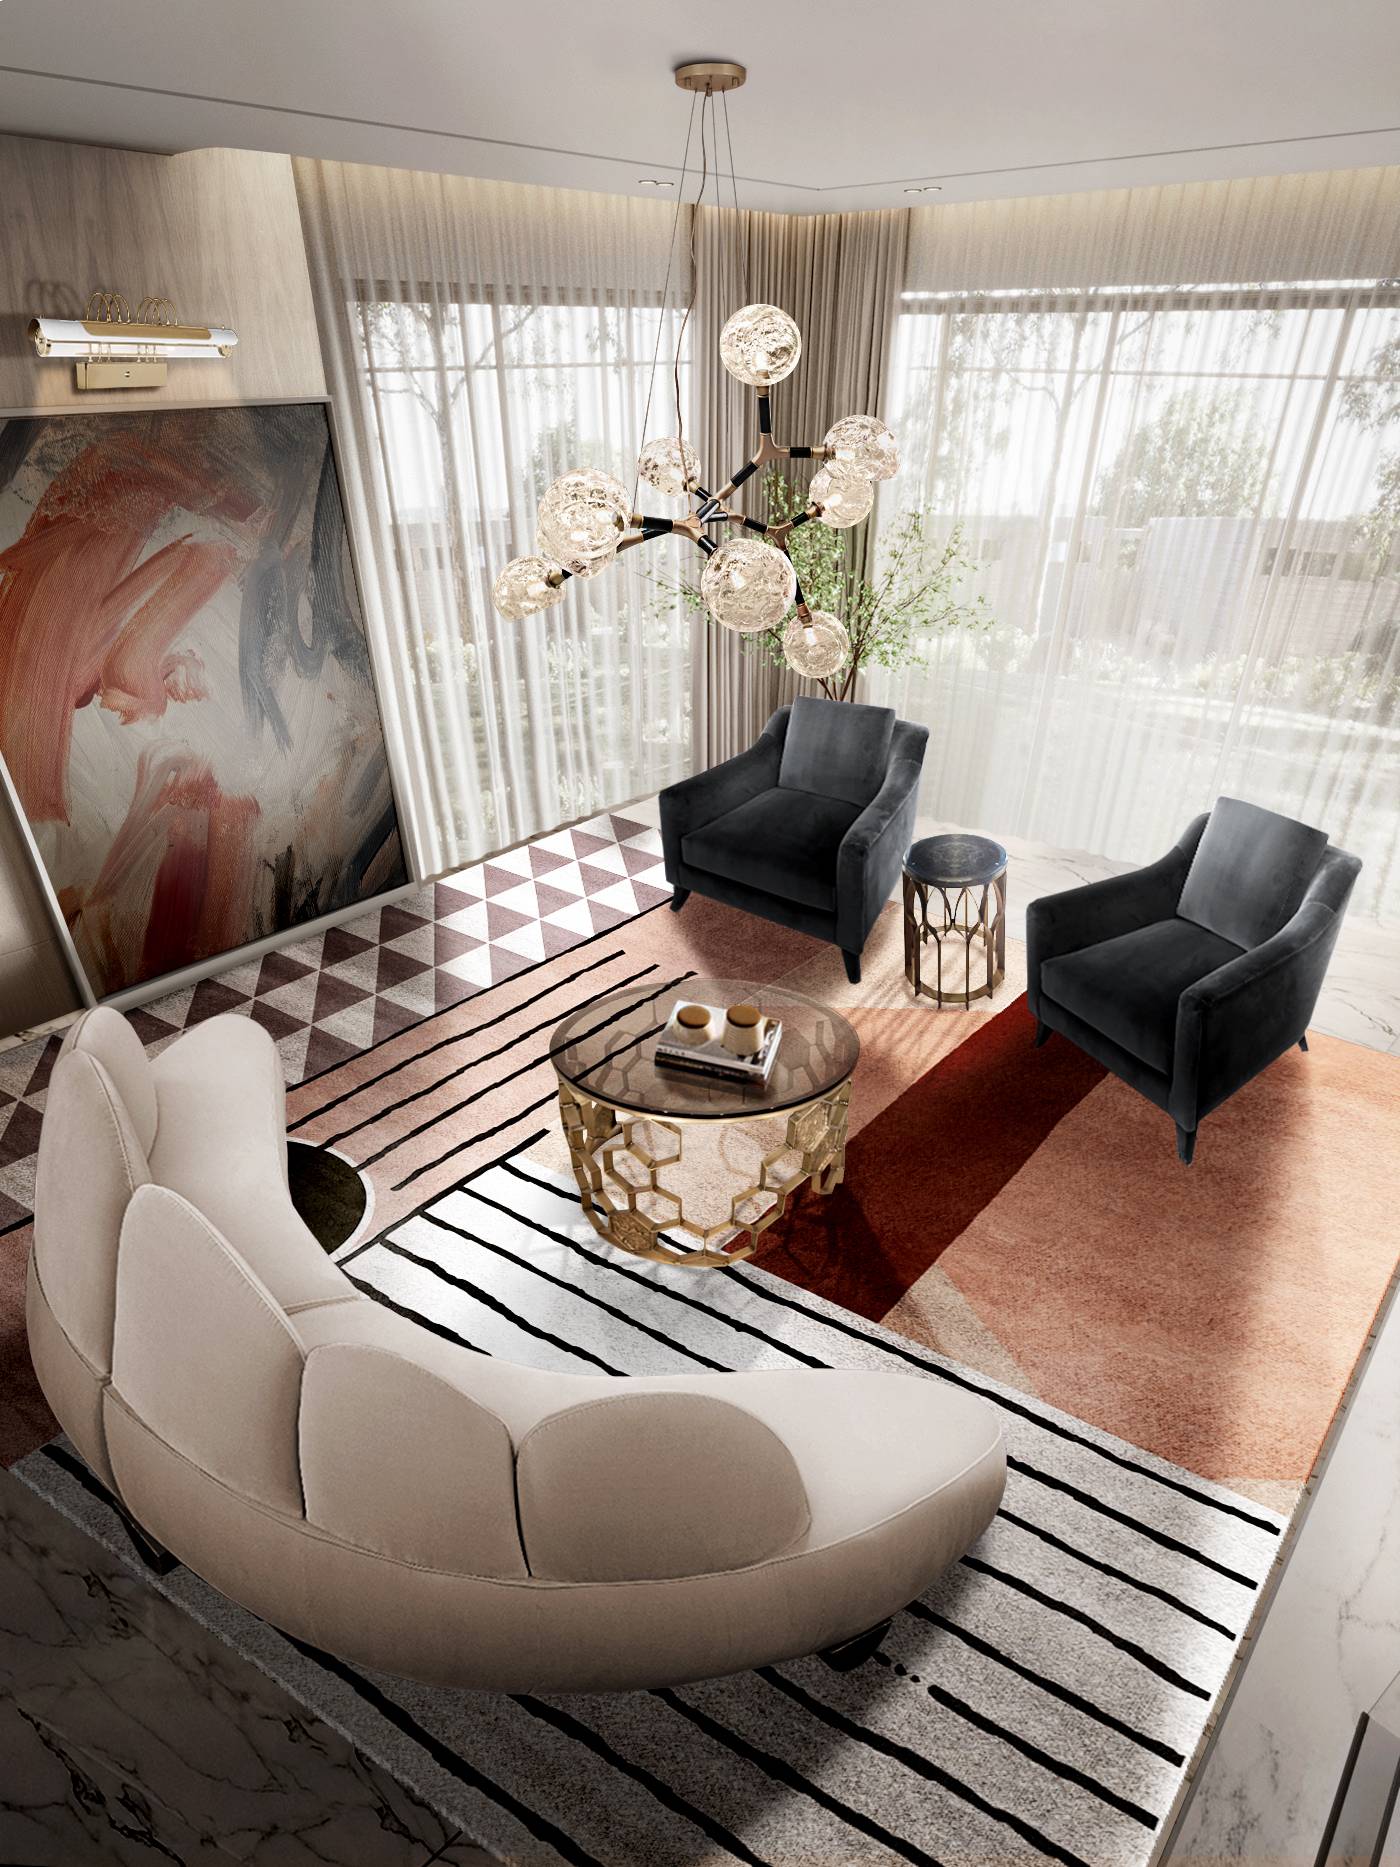 LIVING ROOM DESIGN WITH THE NEW SIMBA SQUARE RUG by Rug'Society